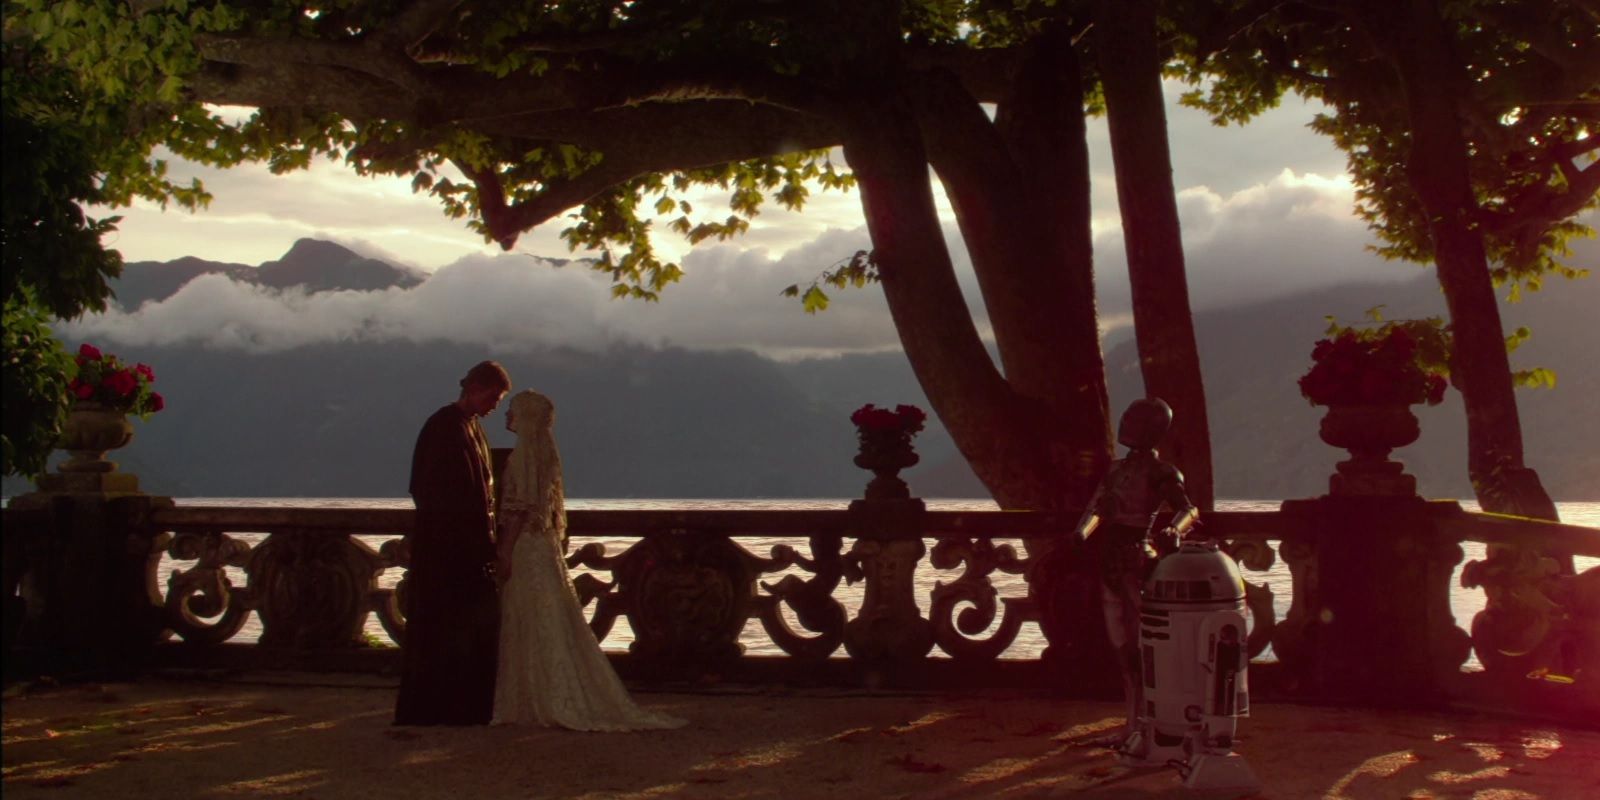 Anakin and Padme's secret wedding at the end of Attack of the Clones